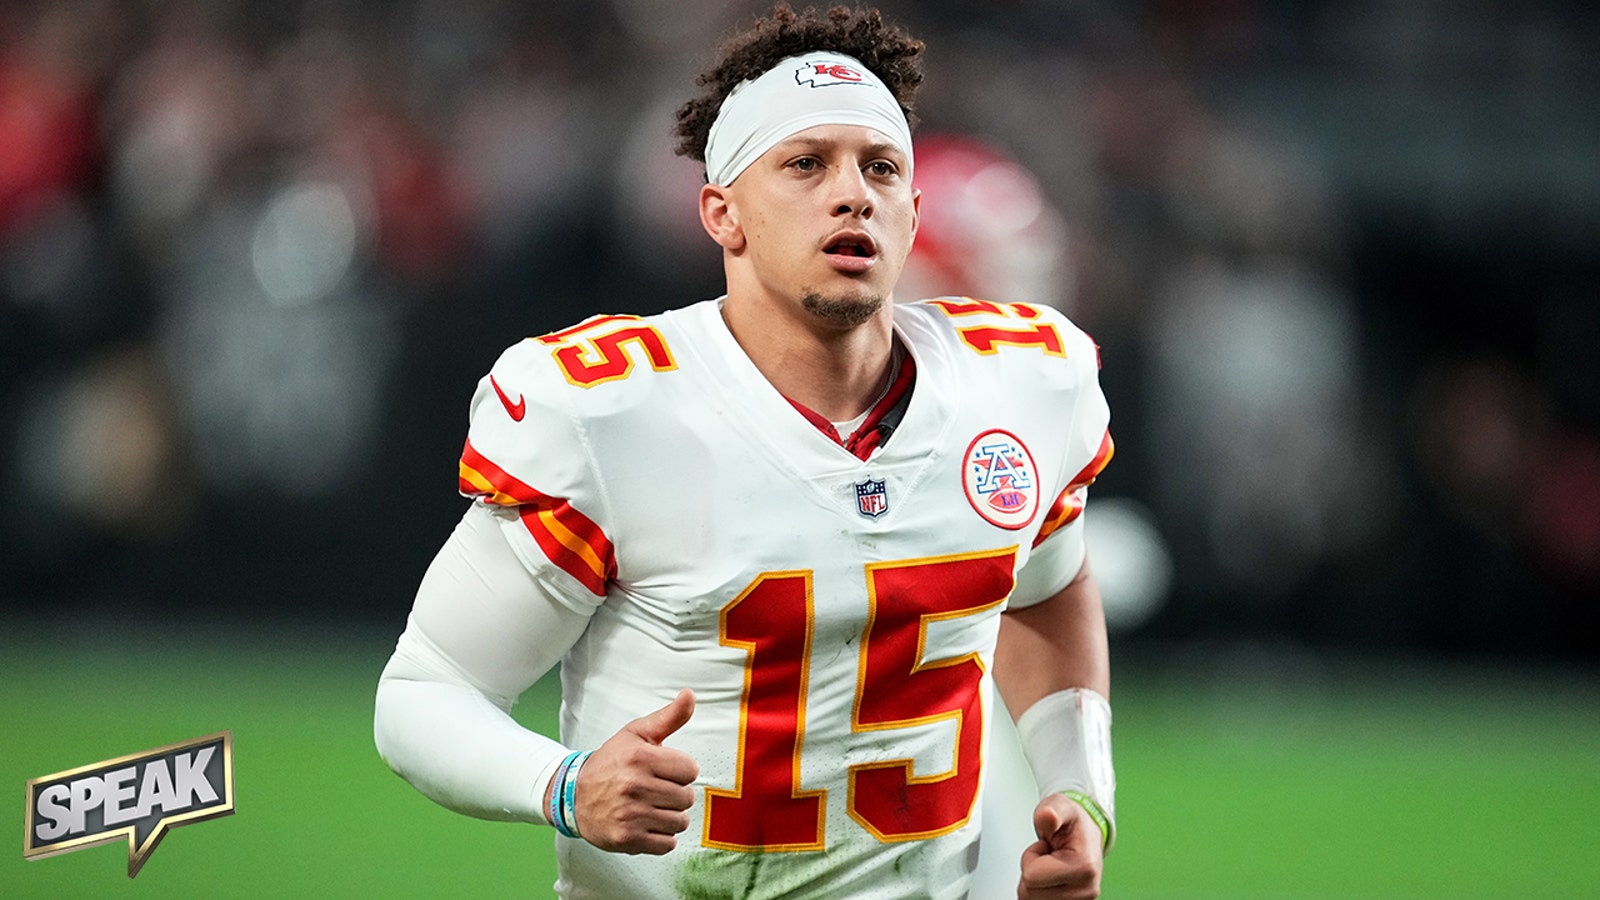 Patrick Mahomes on if Chiefs are a dynasty: "You gotta win three" 